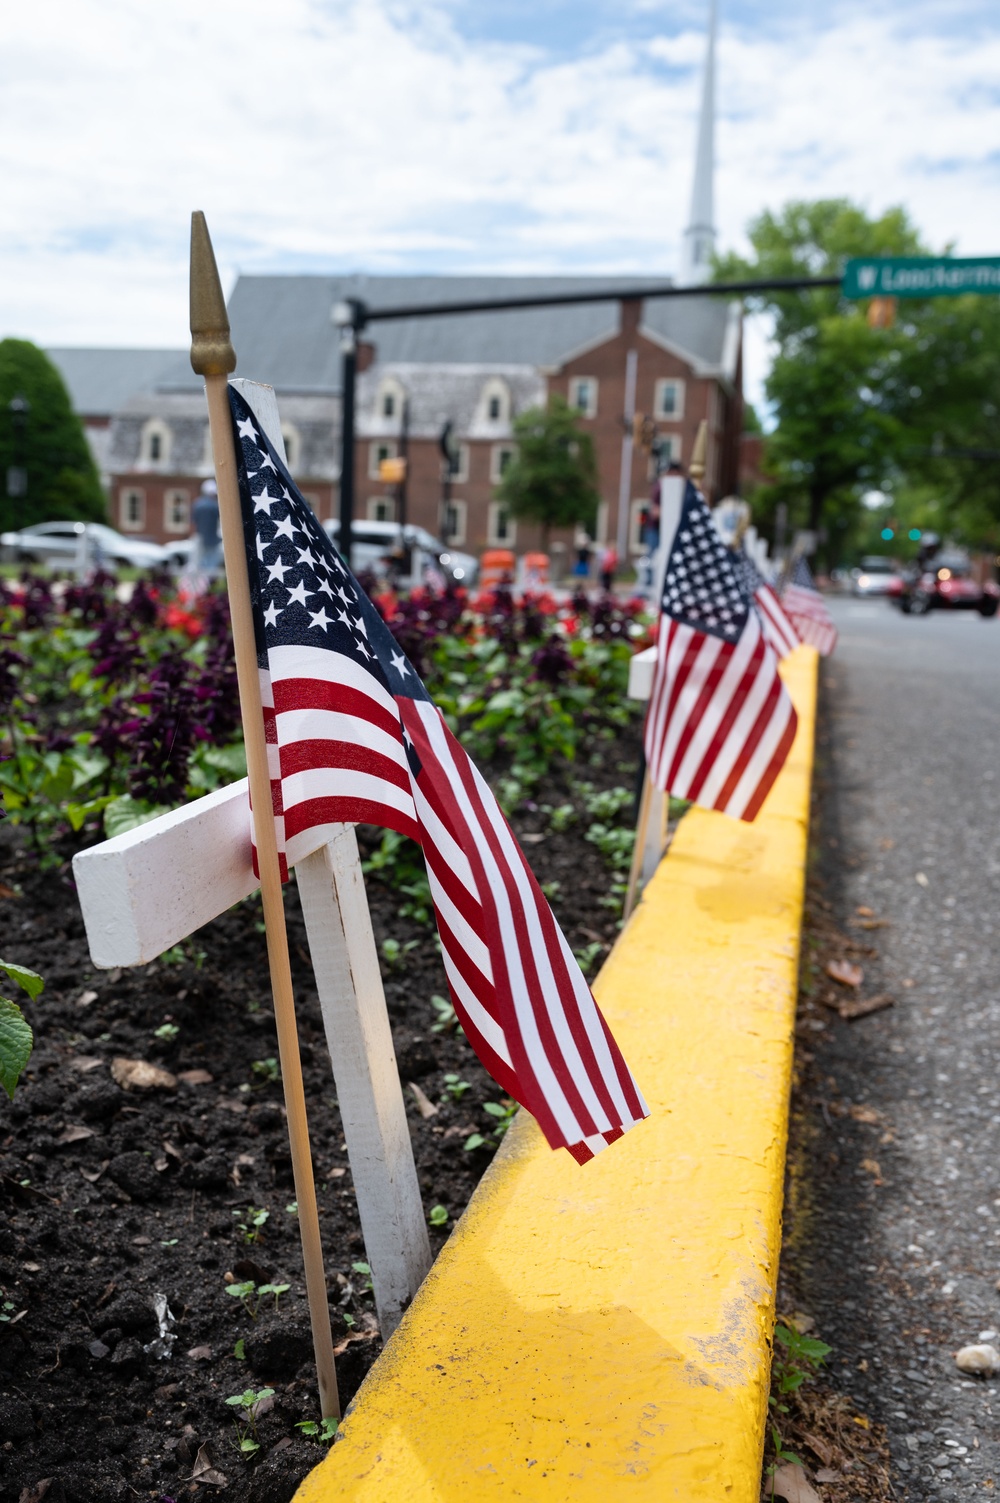 DVIDS Images Team Dover recognizes Memorial Day, honors fallen